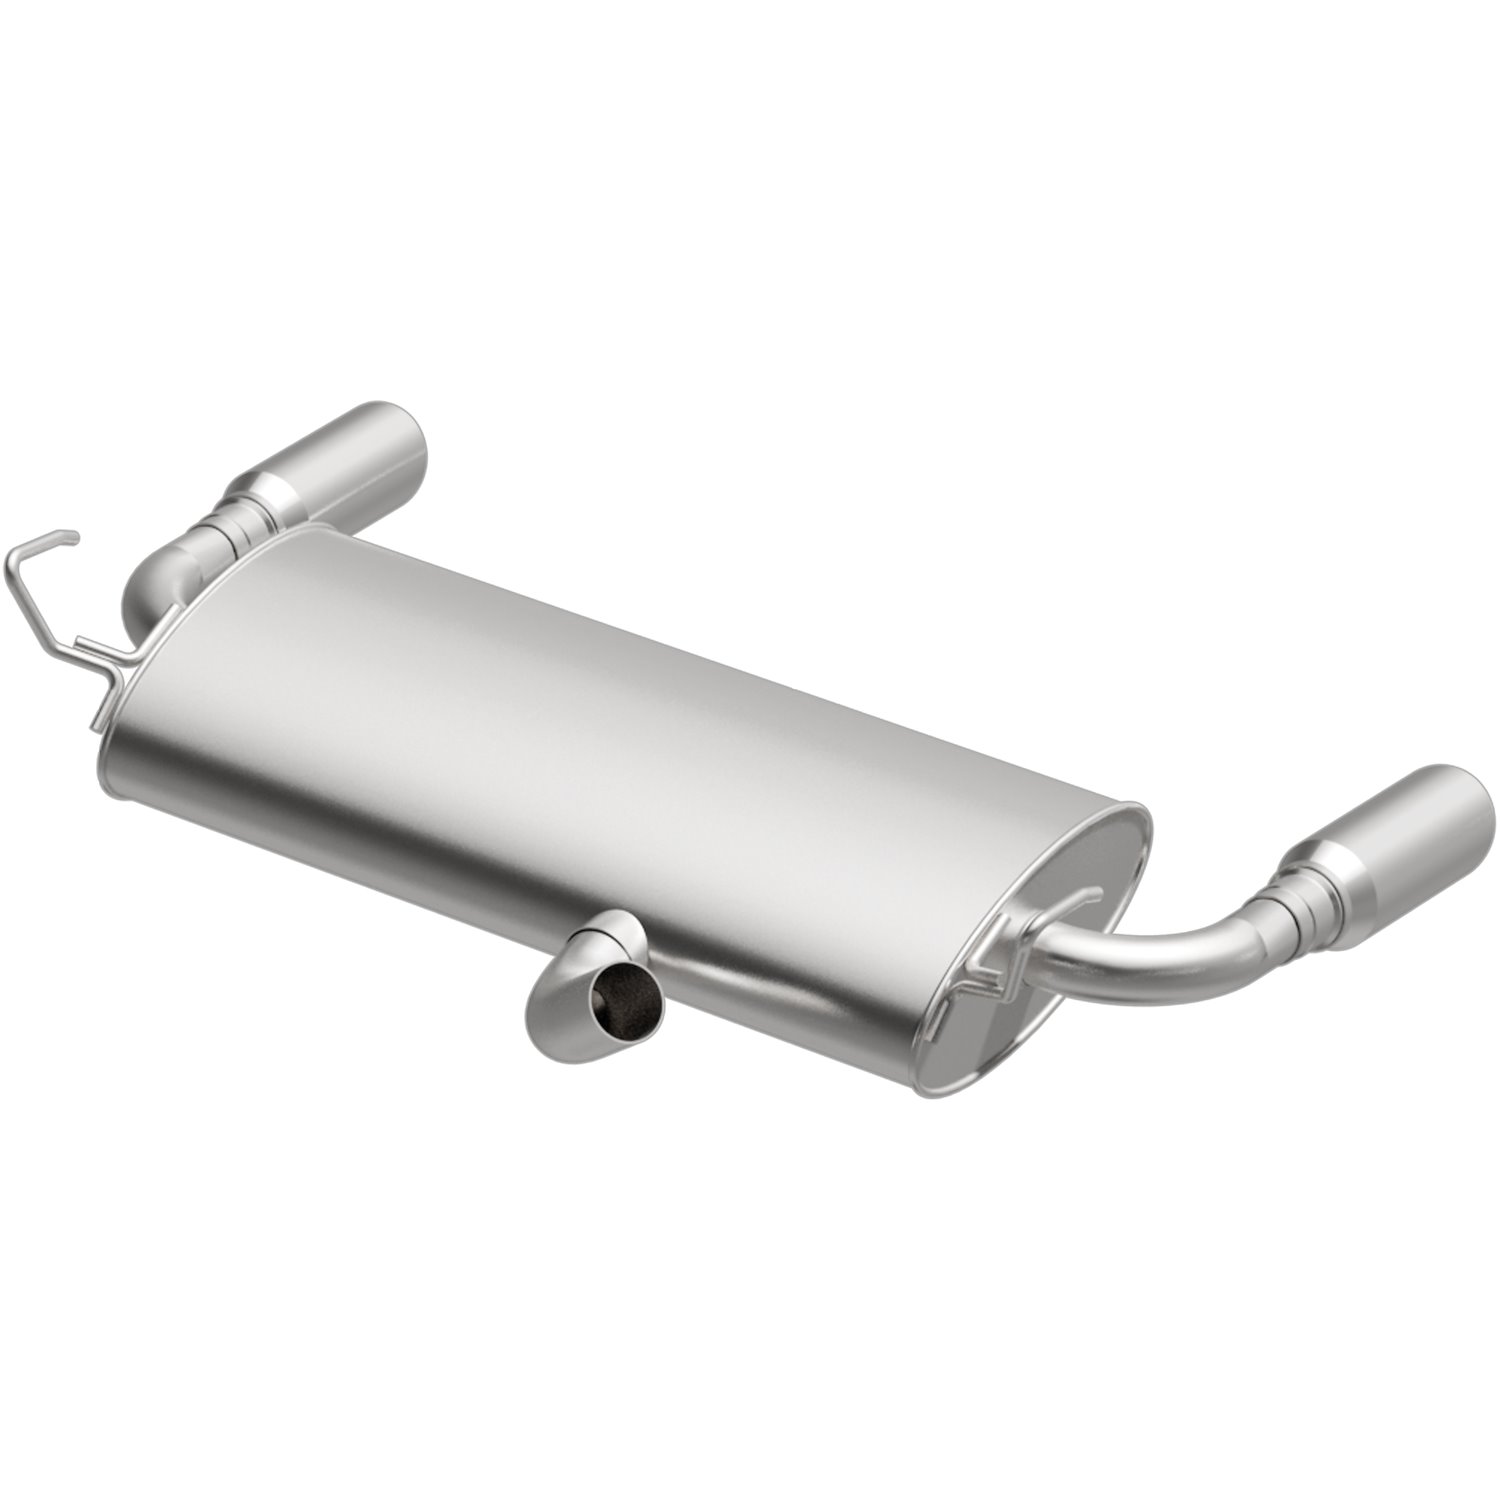 Direct-Fit Exhaust Muffler, 2013-2018 Ford Escape